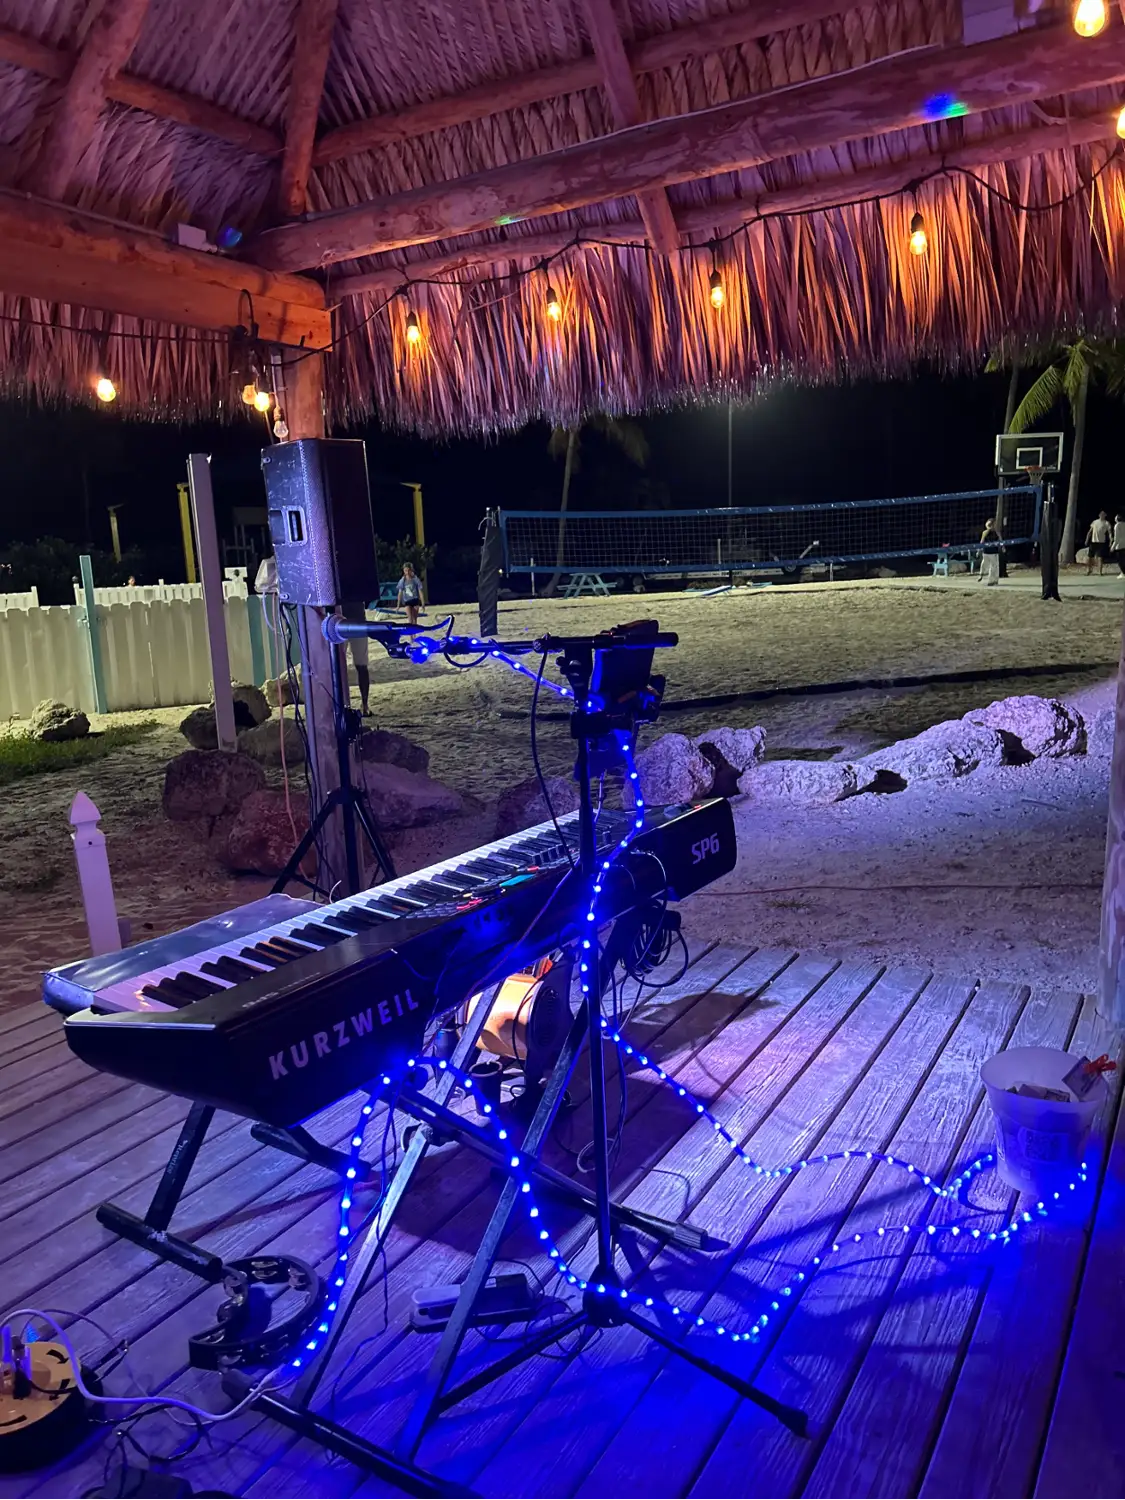 Keyboard set up on stage at night